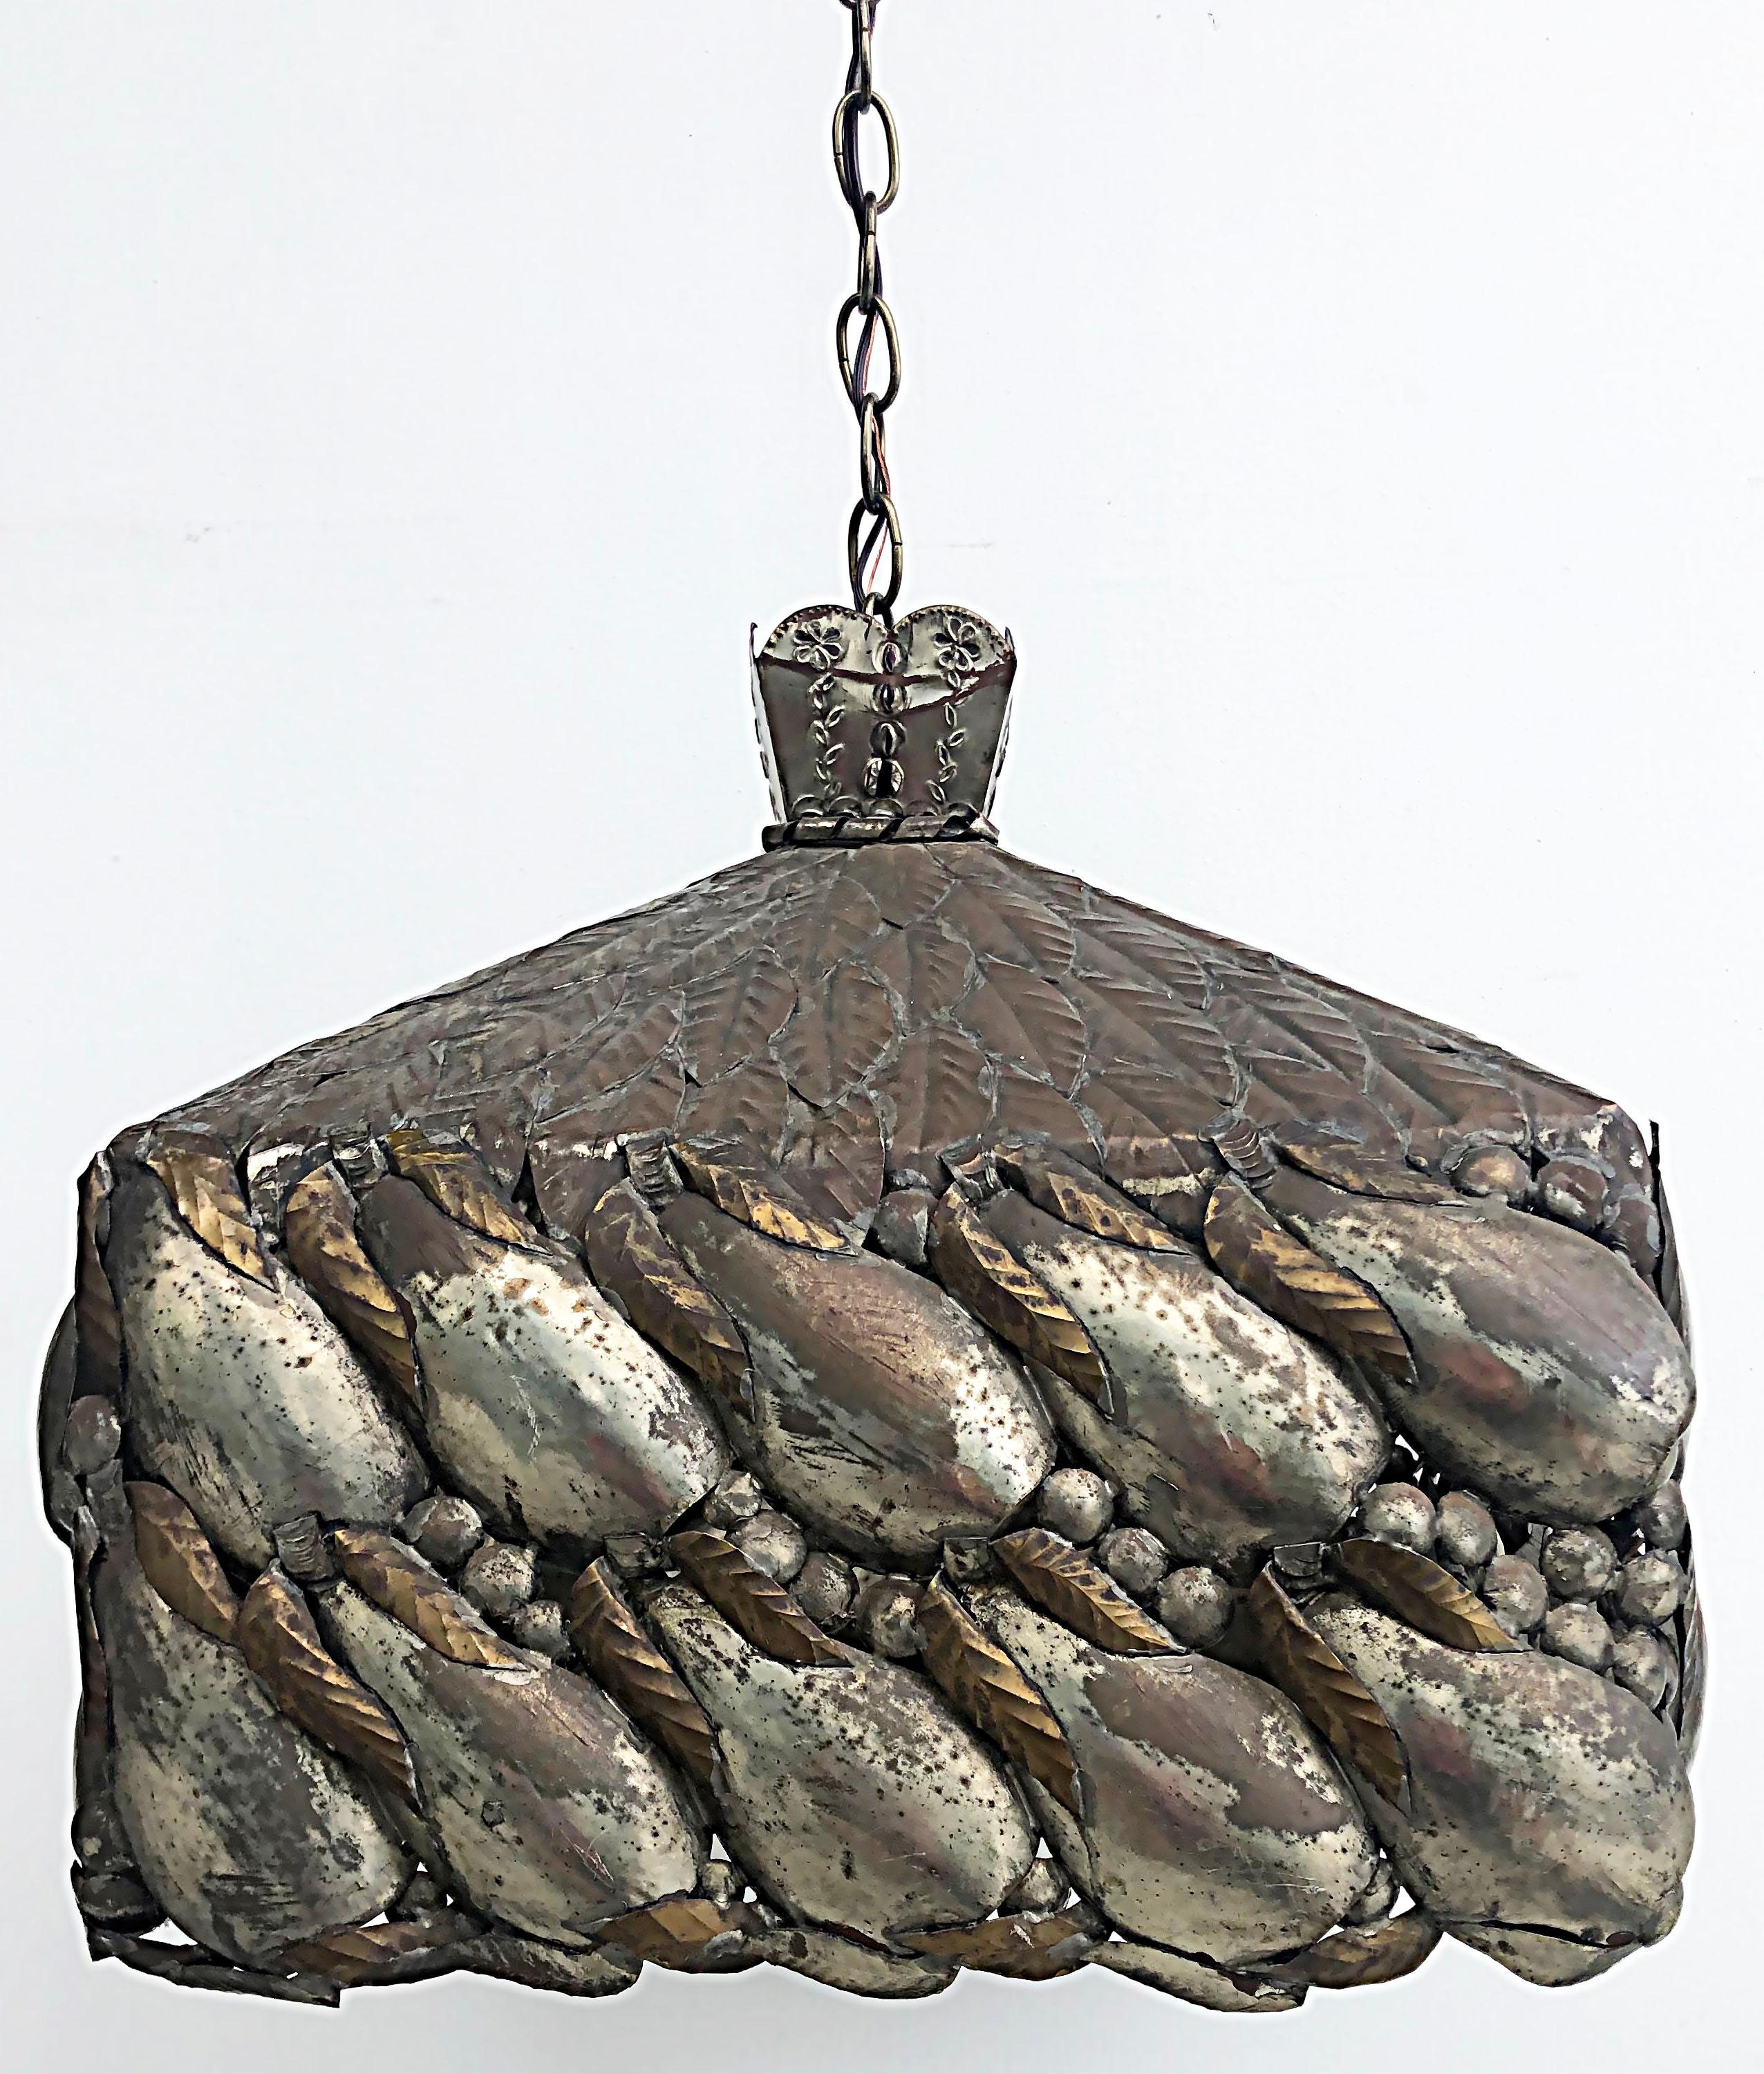 Sergio Bustamante Mexico signed light fixture, mixed metal.

Offered for sale is a Mexican mixed metal mid-century signed Sergio Bustamante hanging light fixture. The fixture is wired and in working condition. The standard socket accommodates a